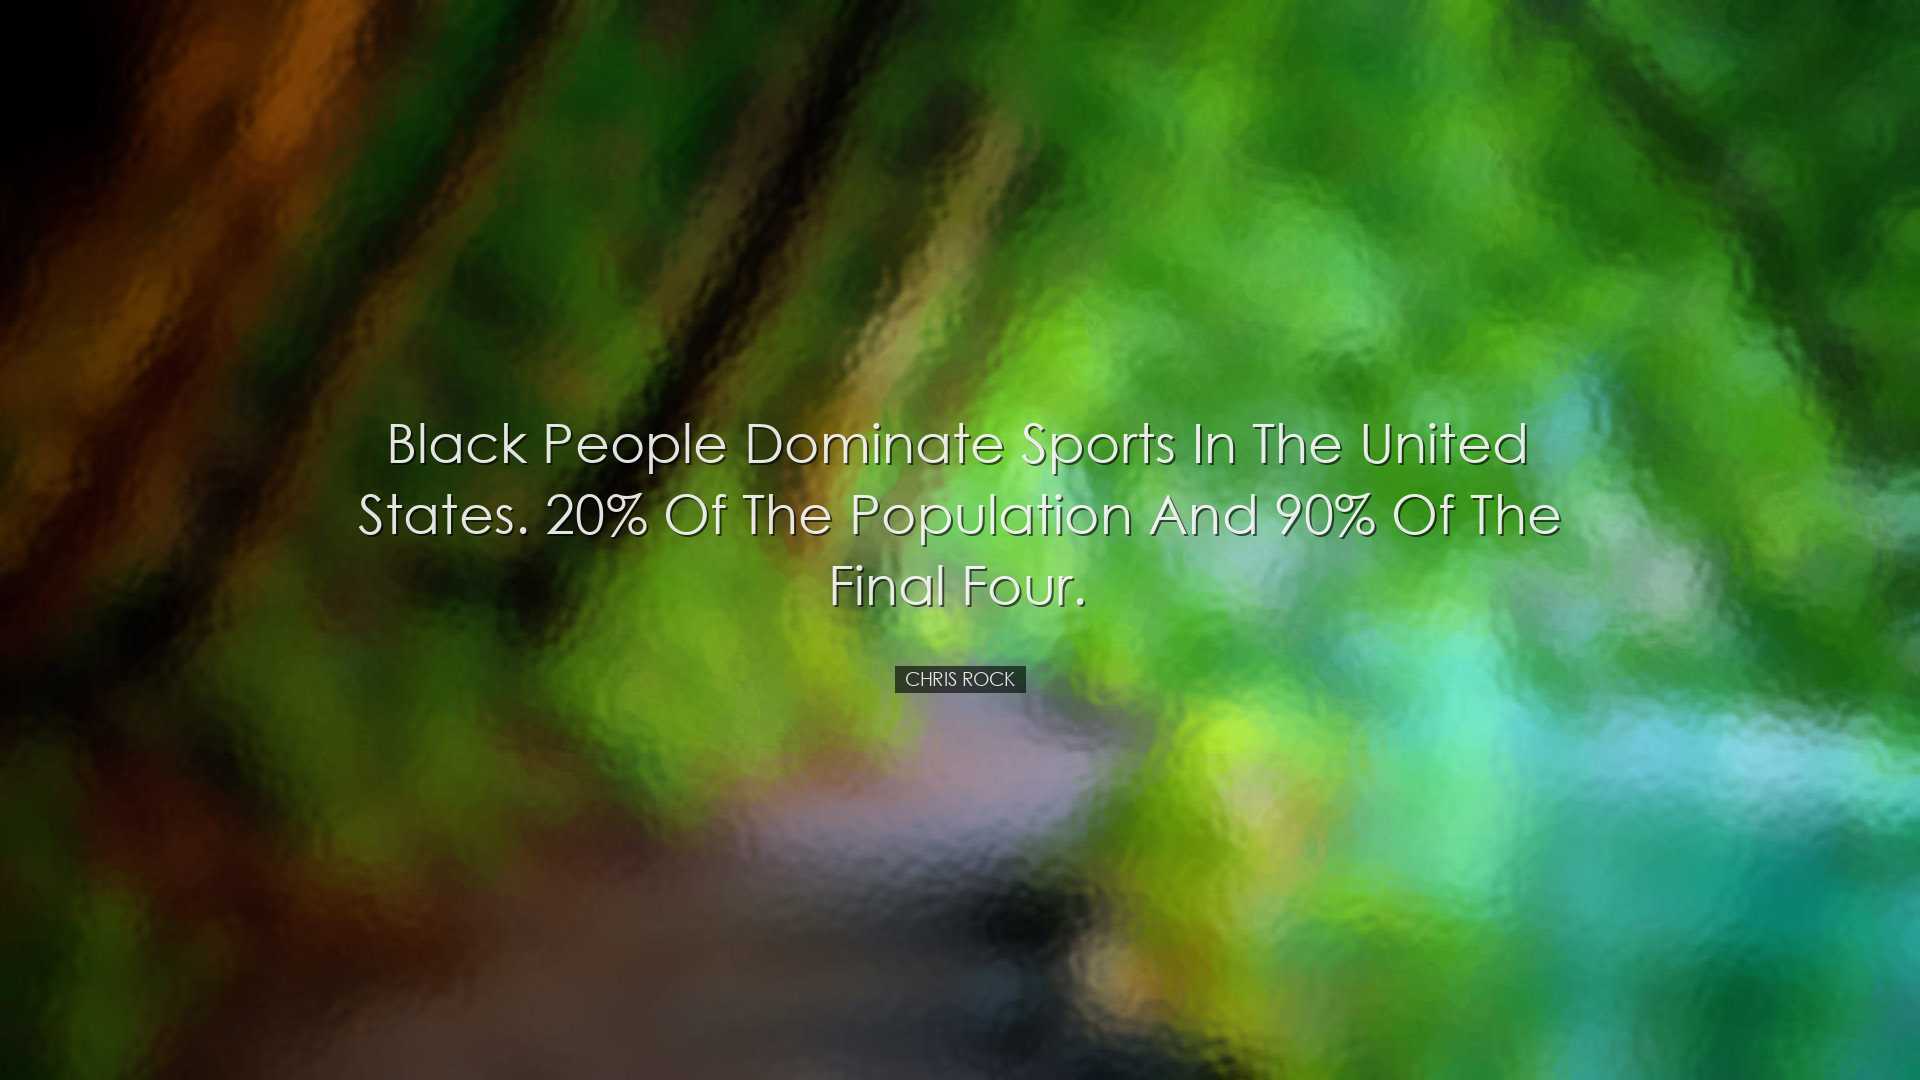 Black people dominate sports in the United States. 20% of the popu